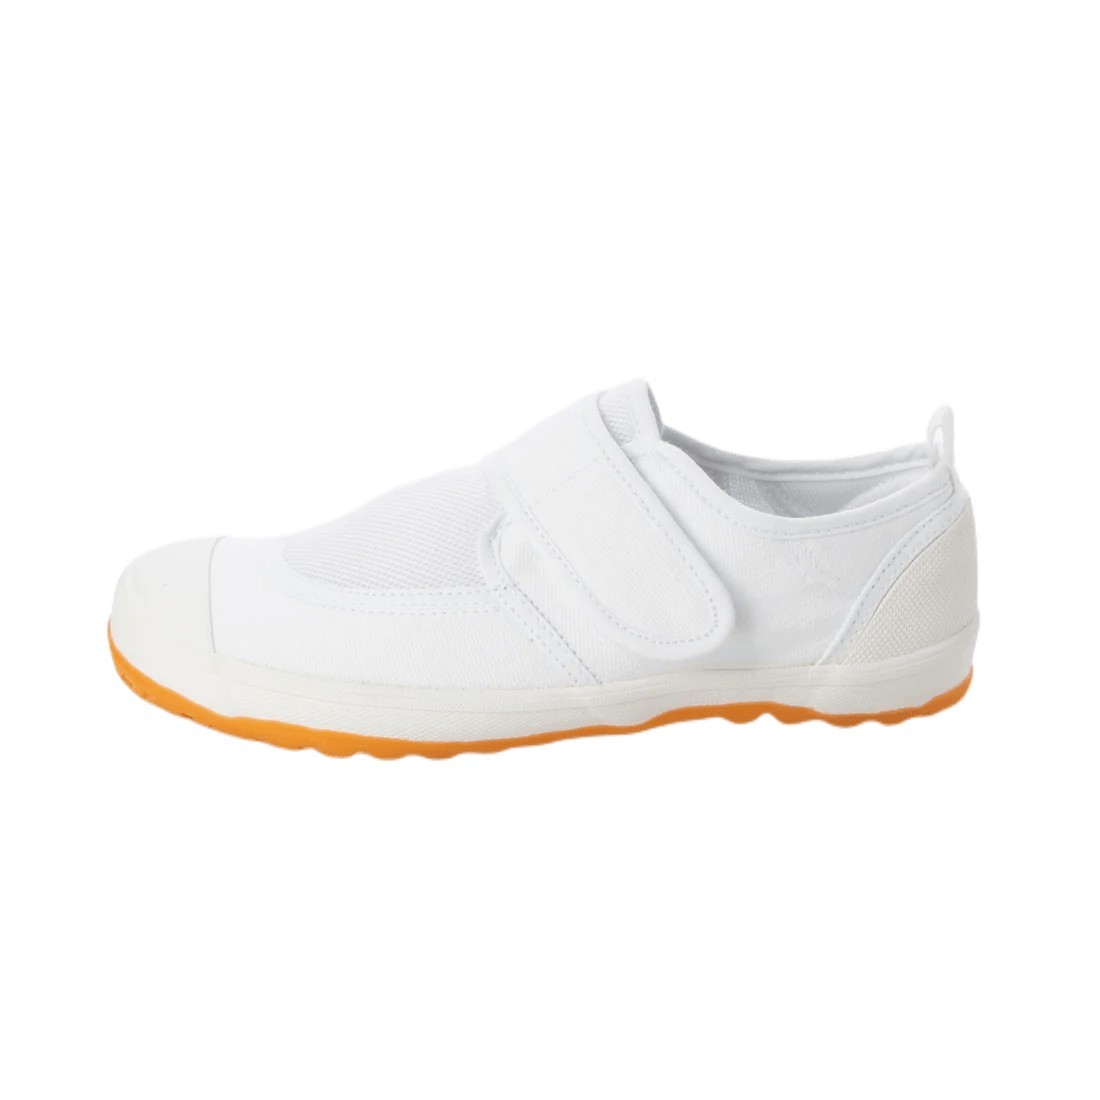 27.5cm white indoor shoes education physical training pavilion indoor shoes touch fasteners name .... kindergarten child care . elementary school man 23998-wht-275